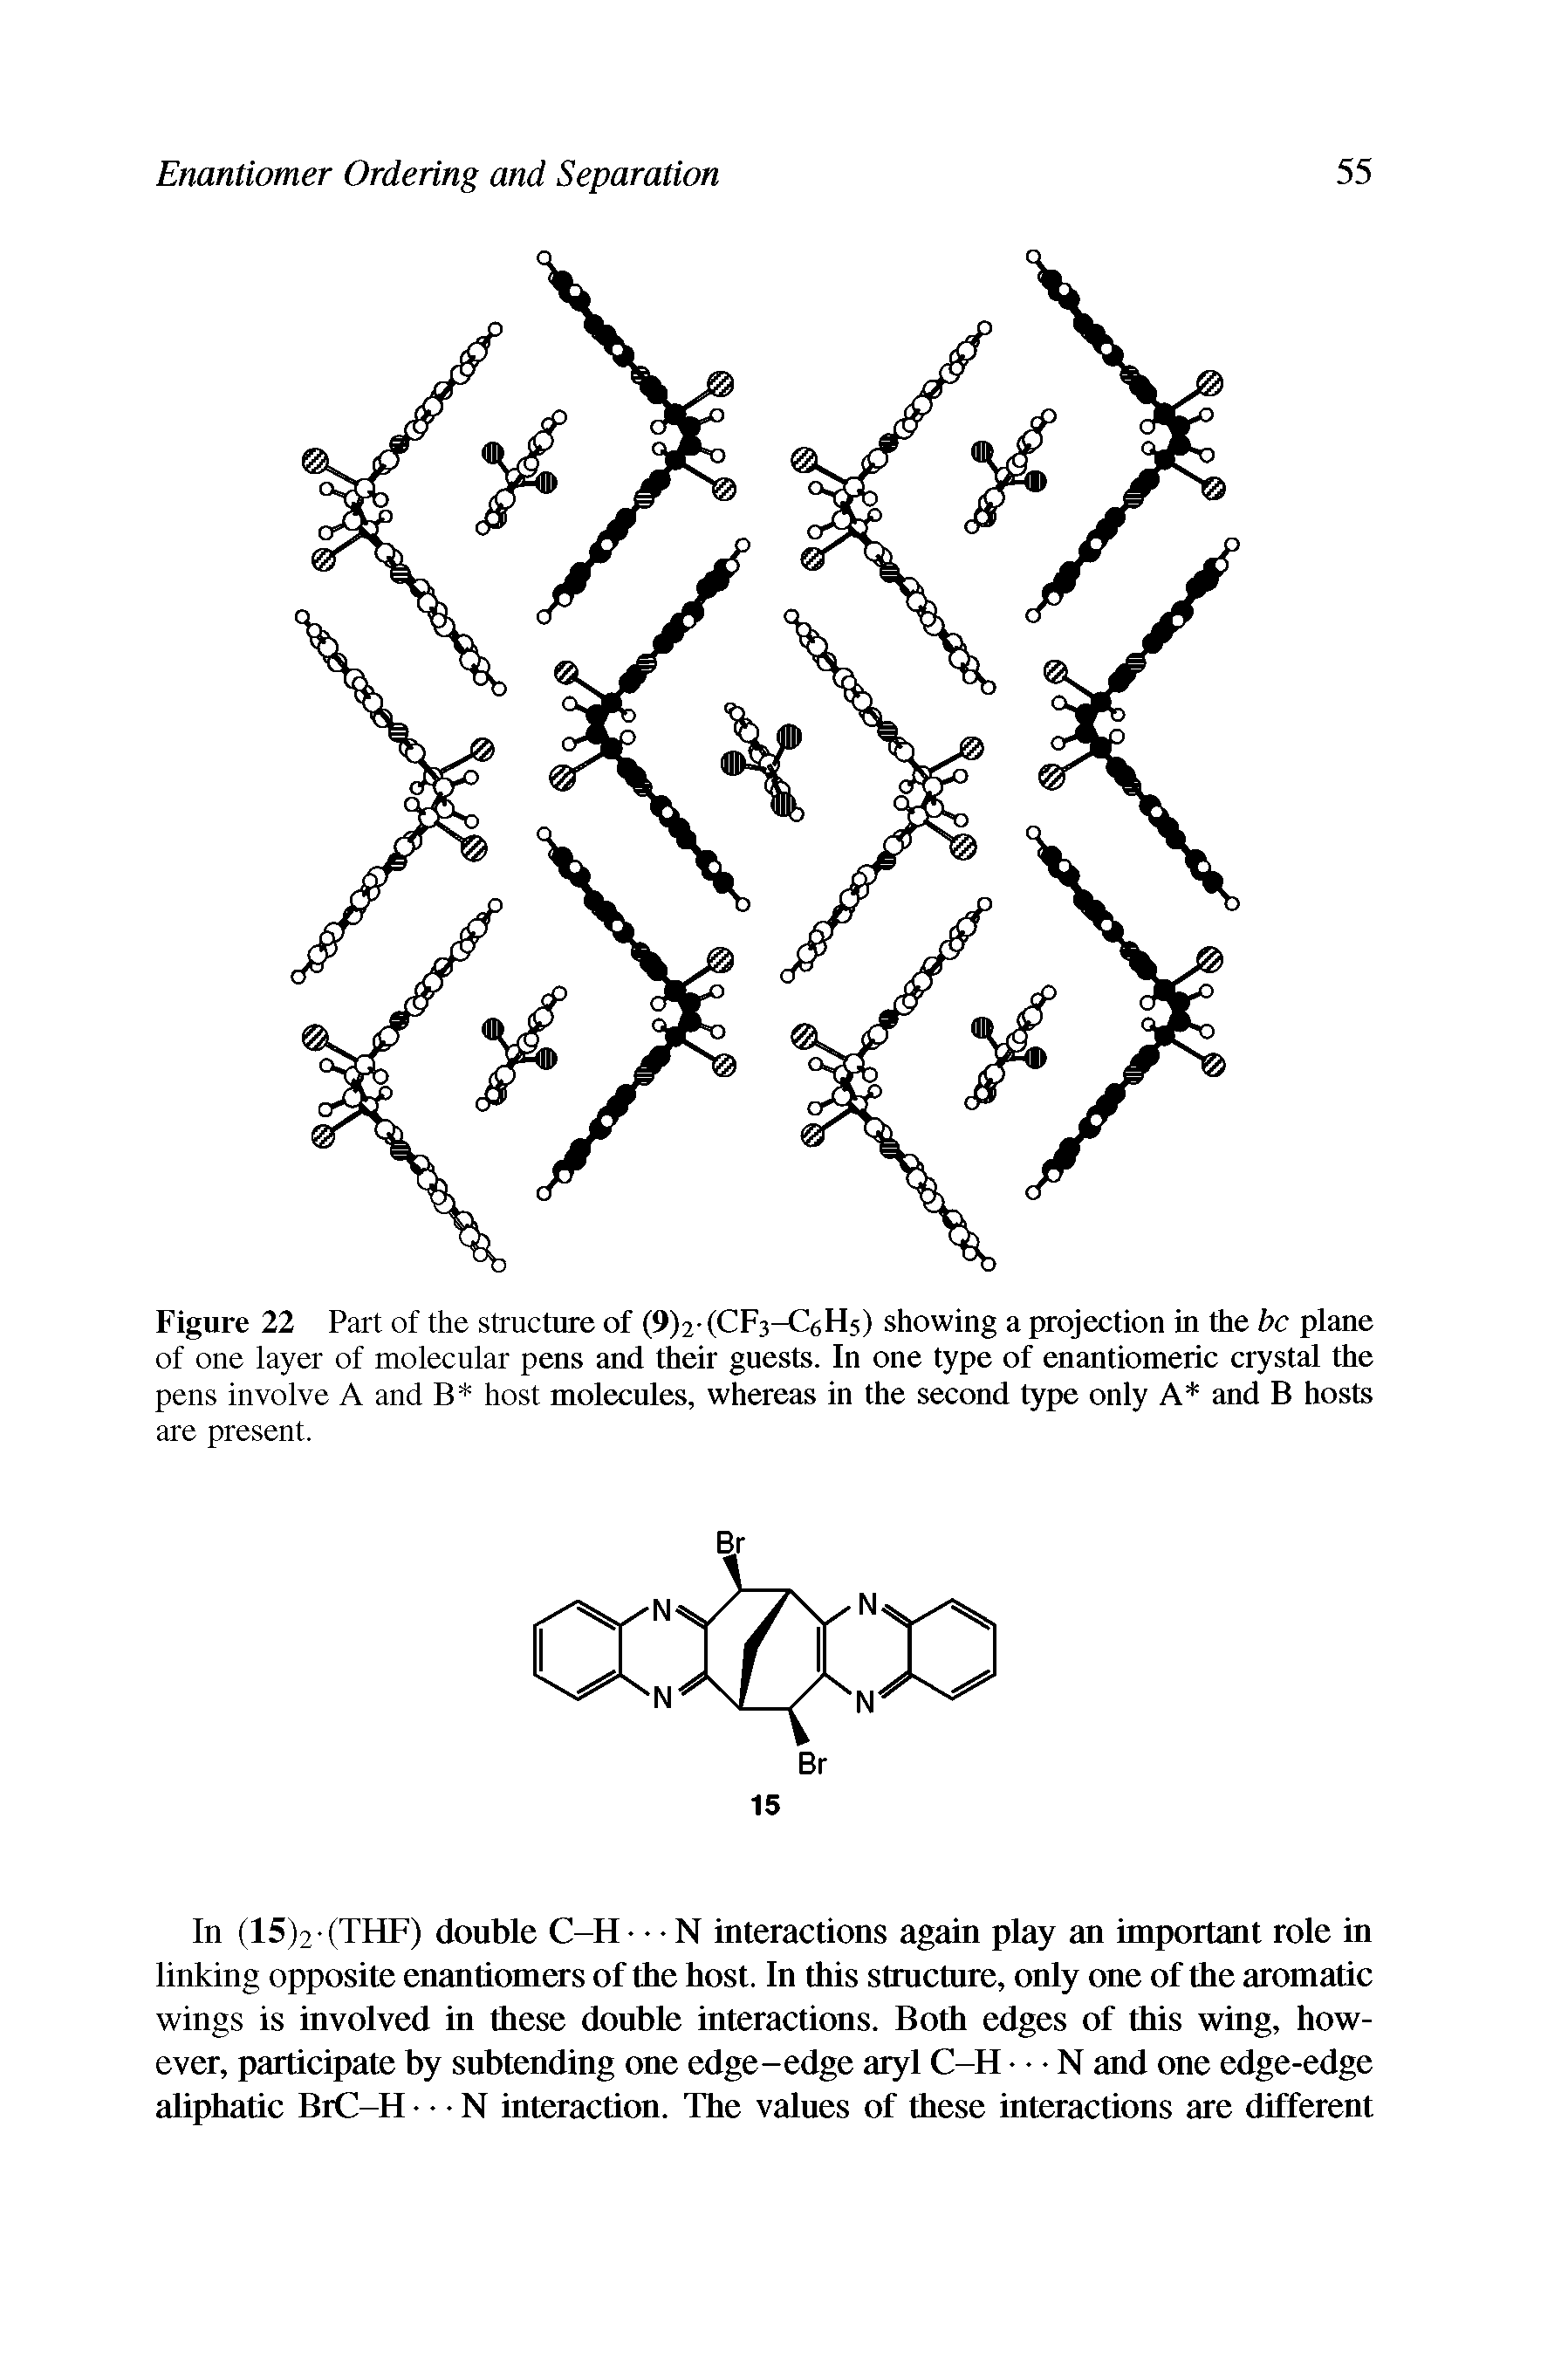 Figure 22 Part of the structure of (9)2-(CF3-CeH5) showing a projection in the be plane of one layer of molecular pens and their guests. In one type of enantiomeric crystal the pens involve A and B host molecules, whereas in the second type only A and B hosts are present.